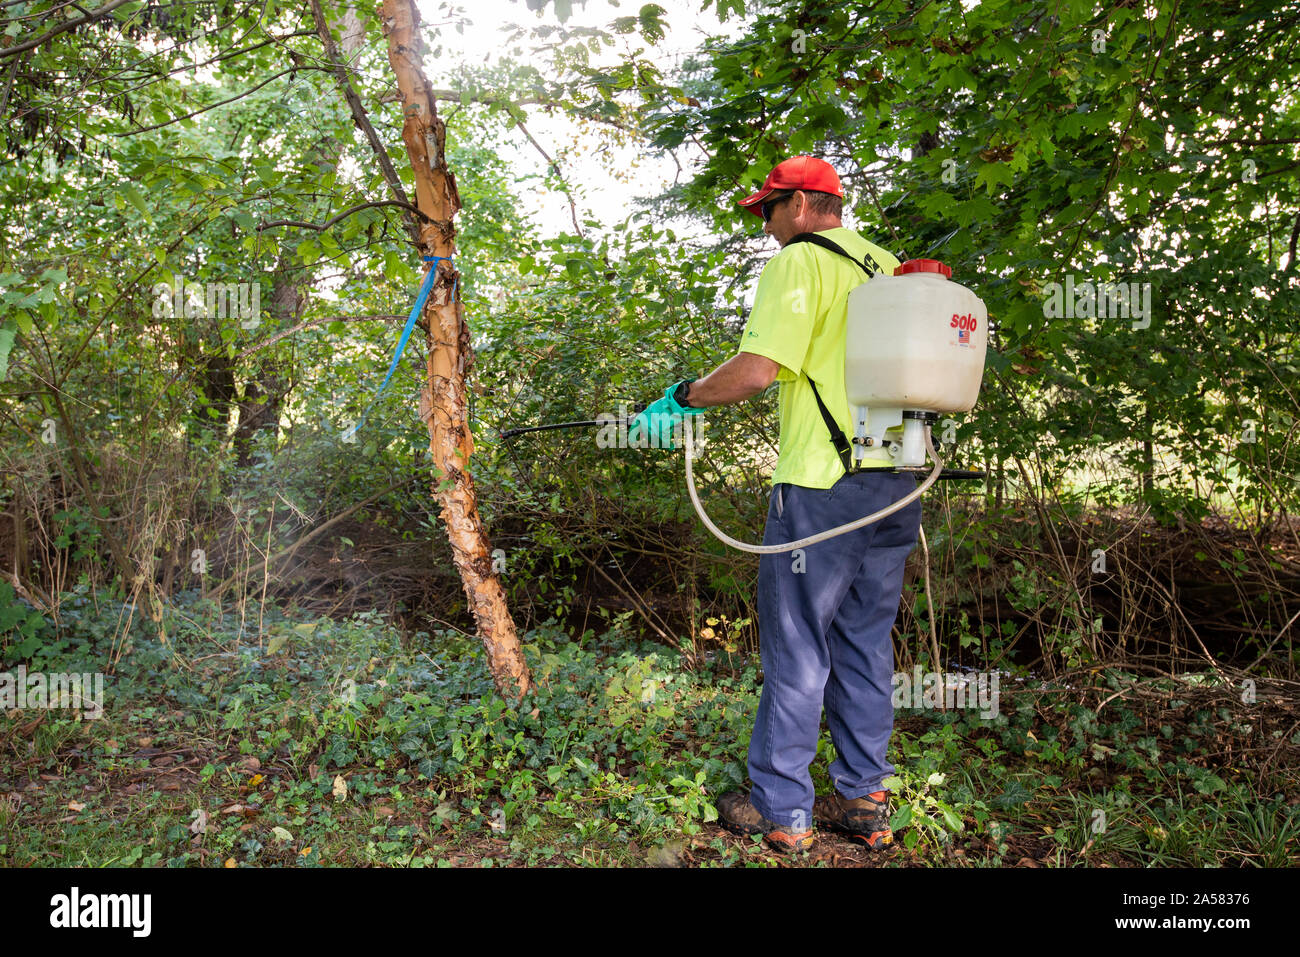 ARBORIST SPRAYING SYSTEMIC INSECTICIDE DINOTEFURAN BARK SPRAY TREATMENT TO TRUNK OF AN ORNAMENTAL RIVER BIRCH TREE TO PROTECT FROM SPOTTED LANTERNFLY Stock Photo